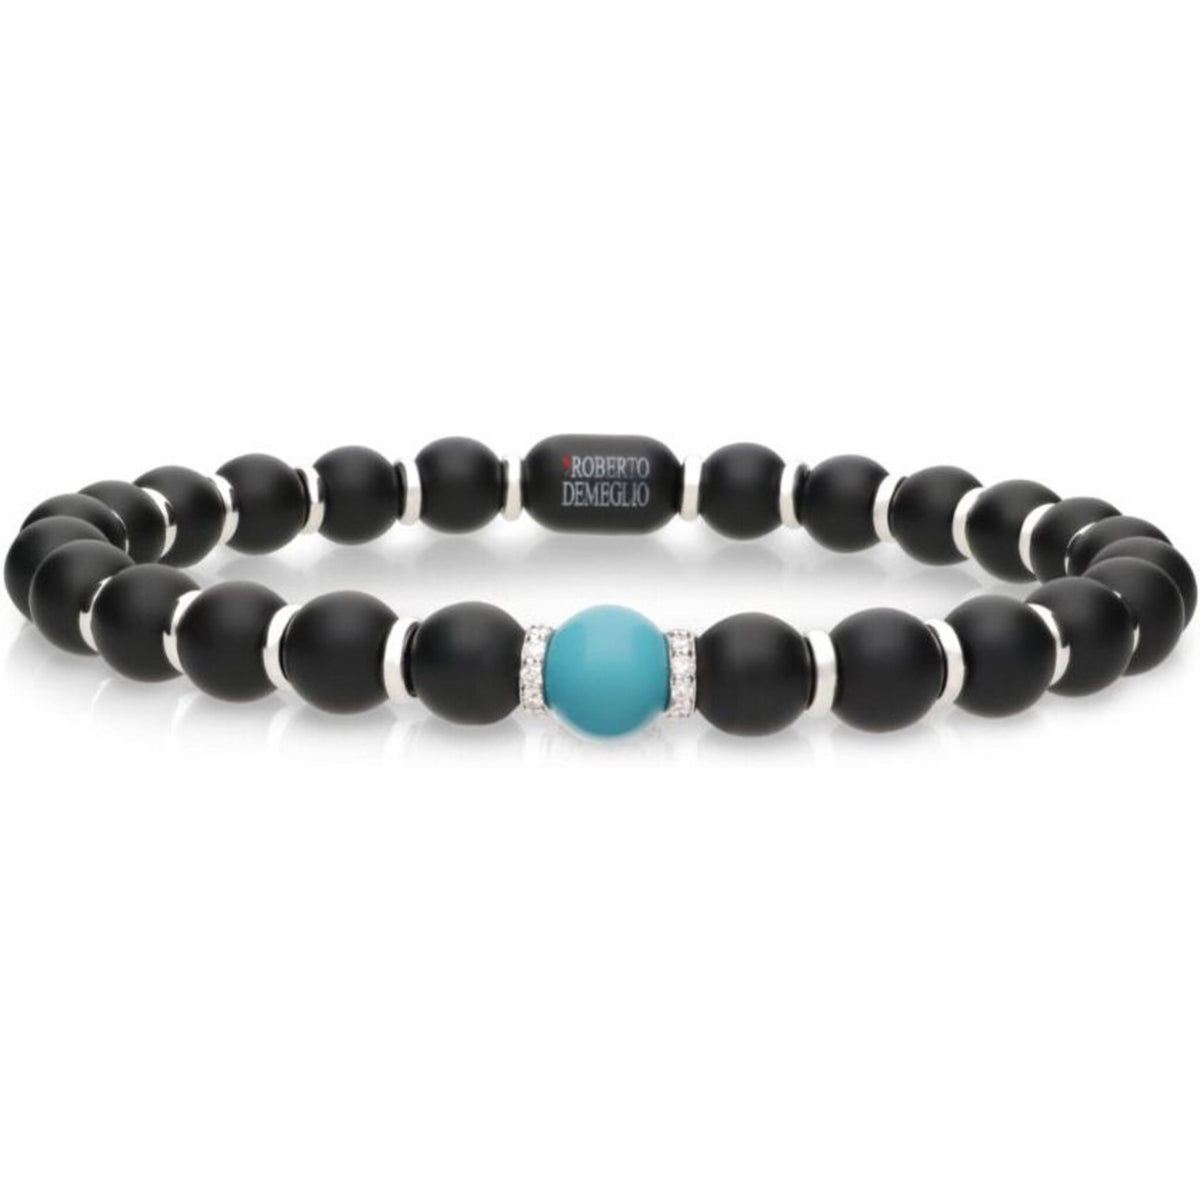 Roberto Demeglio - 6.5mm Matte Black Ceramic Stretch Bracelet With 1 Turquoise, 2 Diamond Beads and Gold Rodells in 18K White Gold